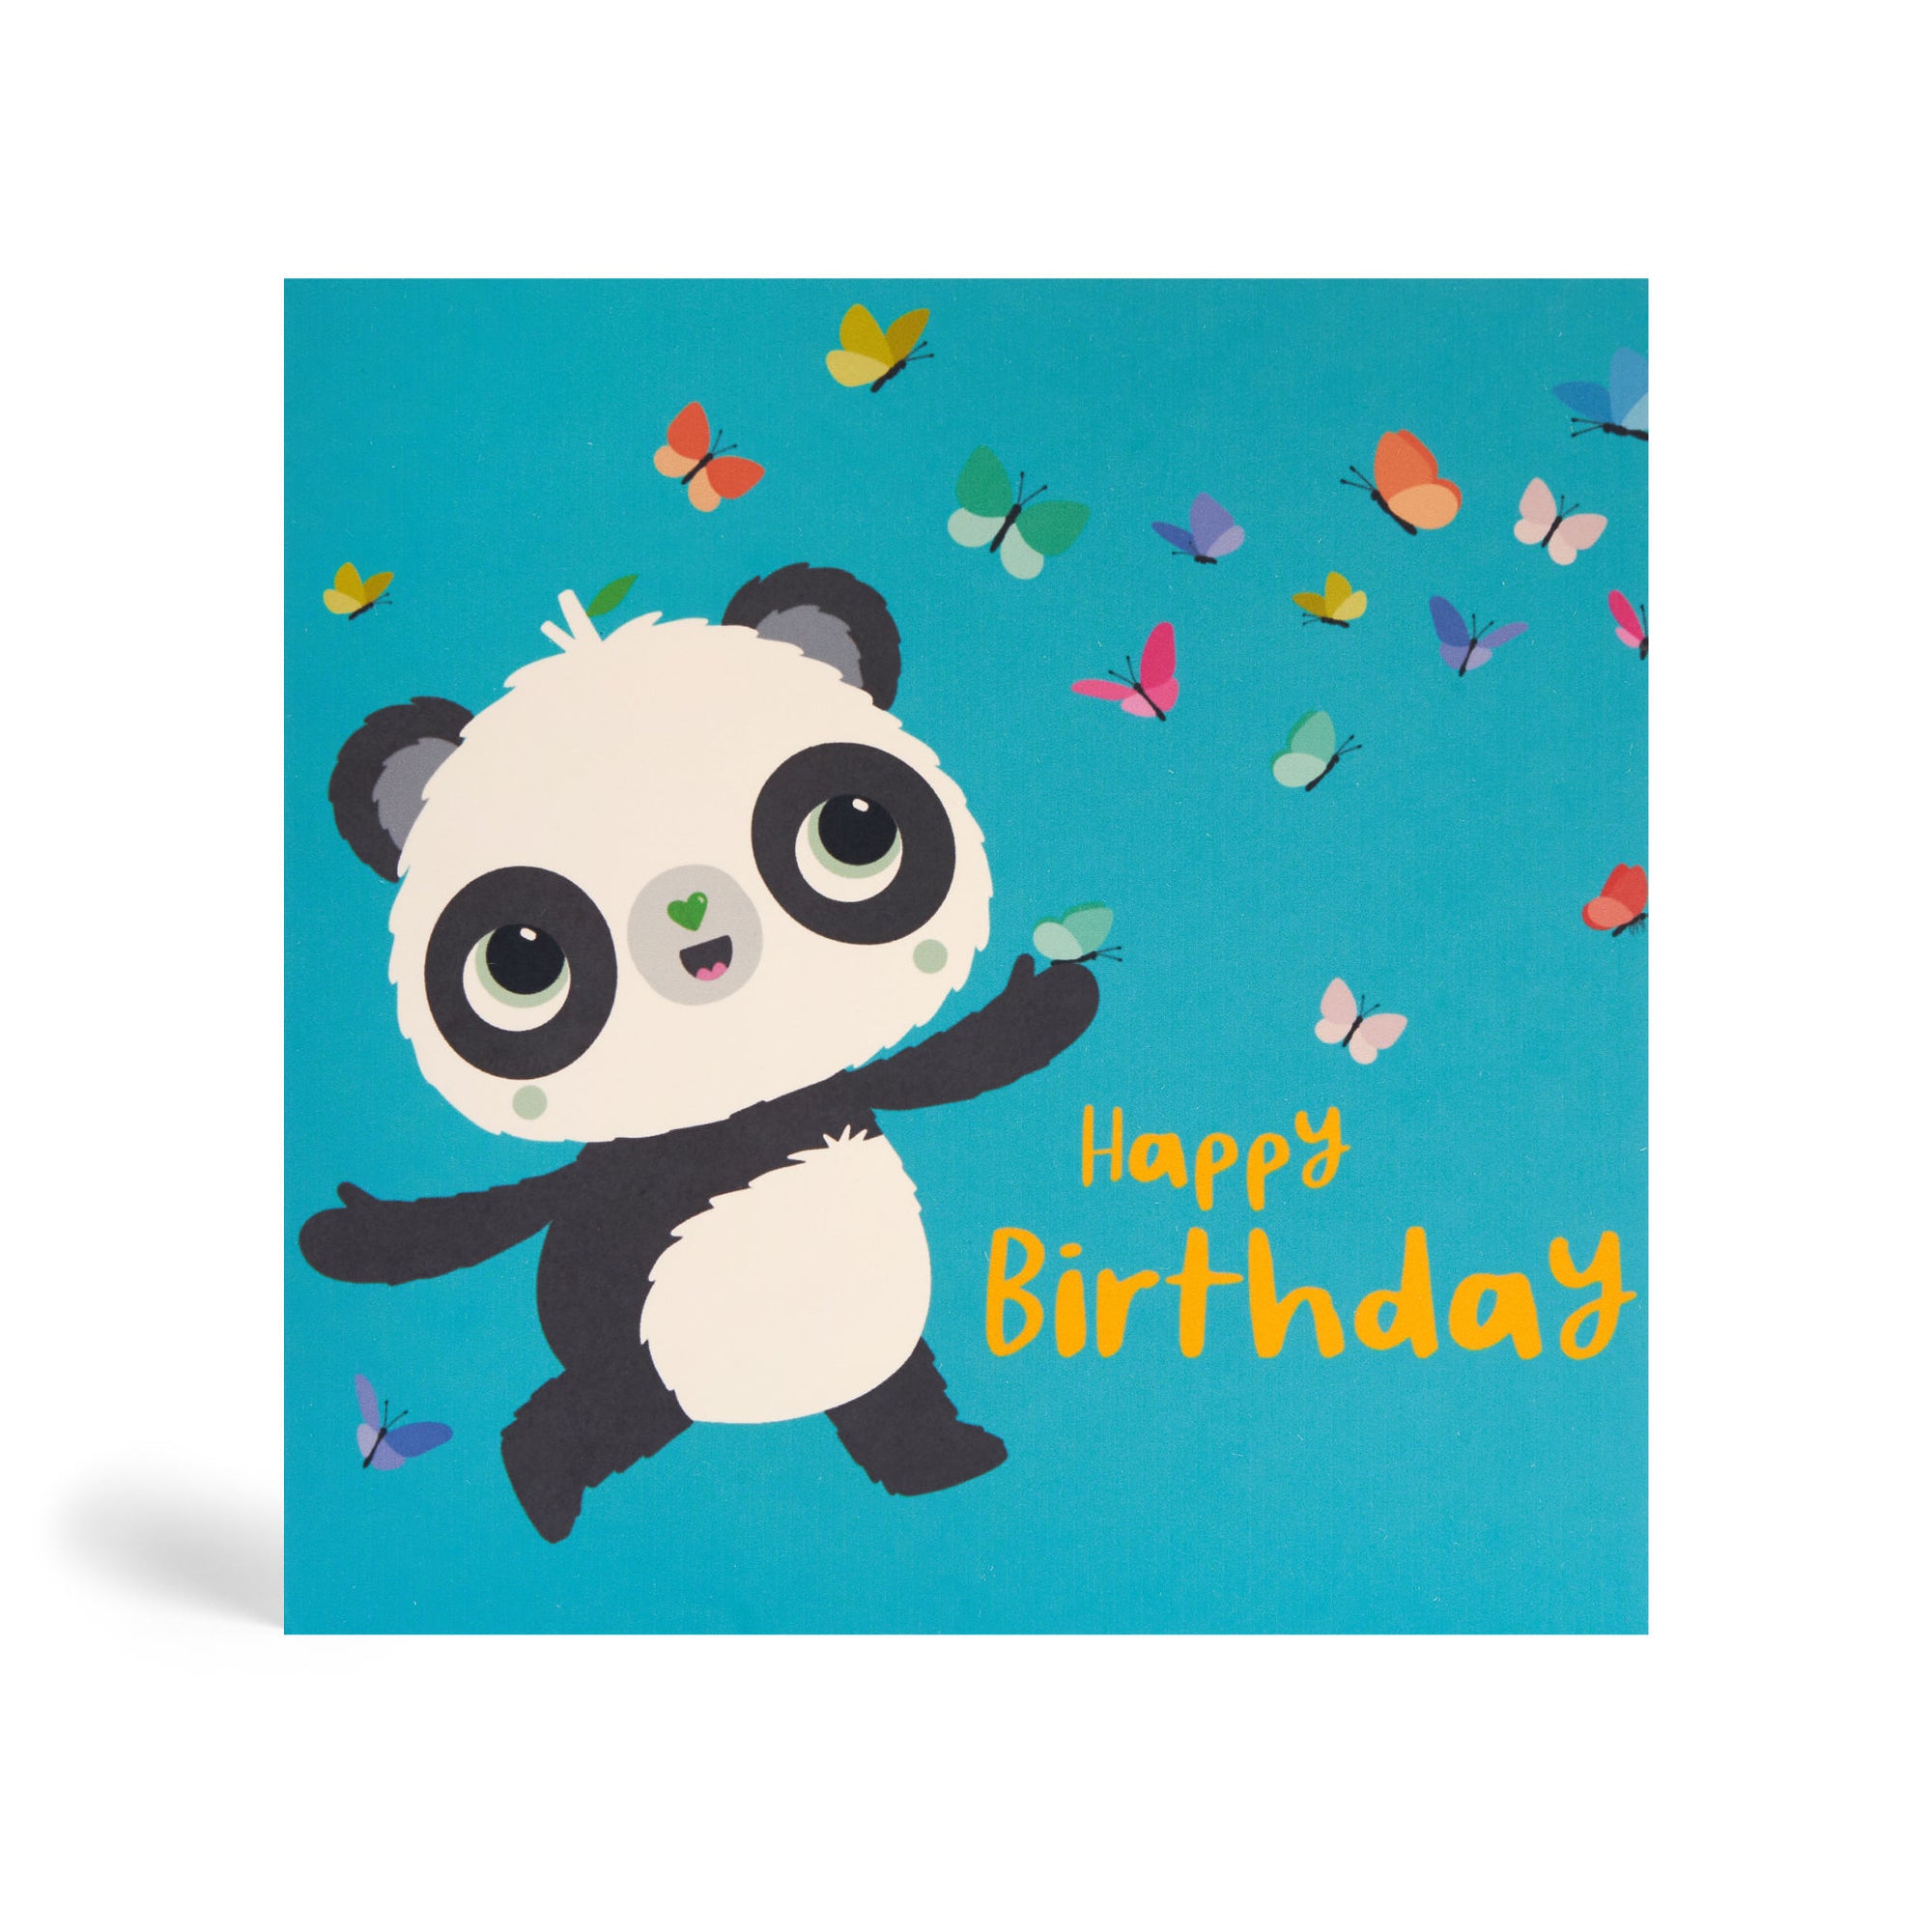 Teal 150mm square eco-friendly, tree free, birthday greeting card with Panda enjoying the company of several beautiful colourful butterflies. The card says happy birthday in yellow.